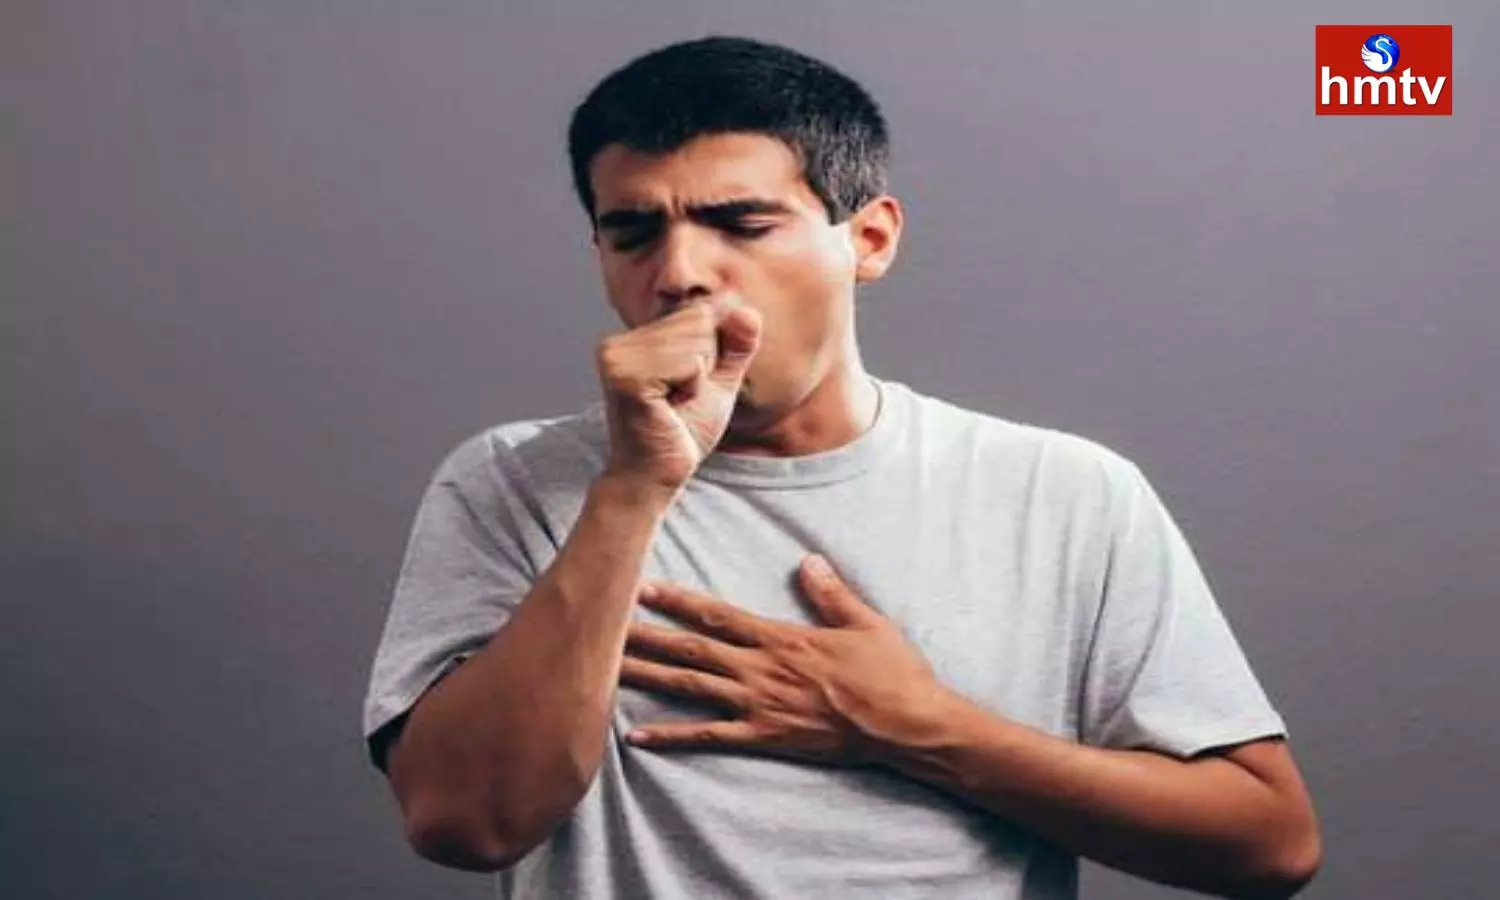 Follow these tips if you have cough problem in winter